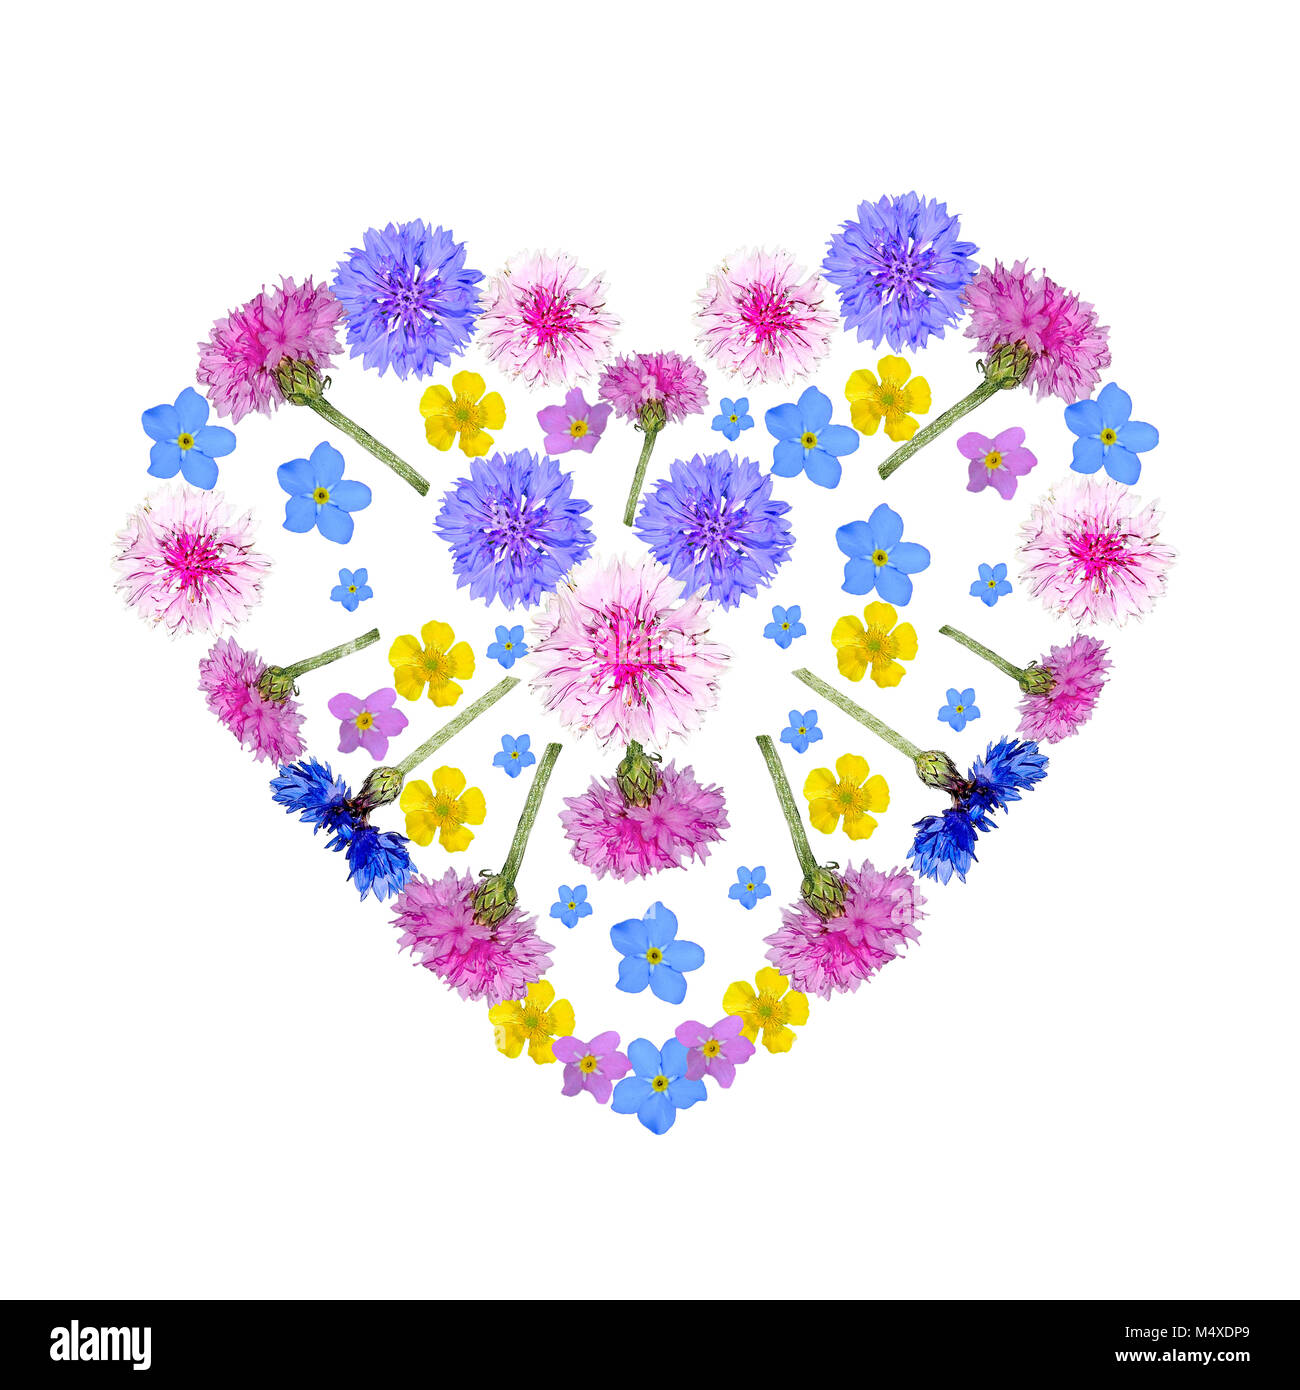 Colorful floral heart from gentle wild flowers Stock Photo